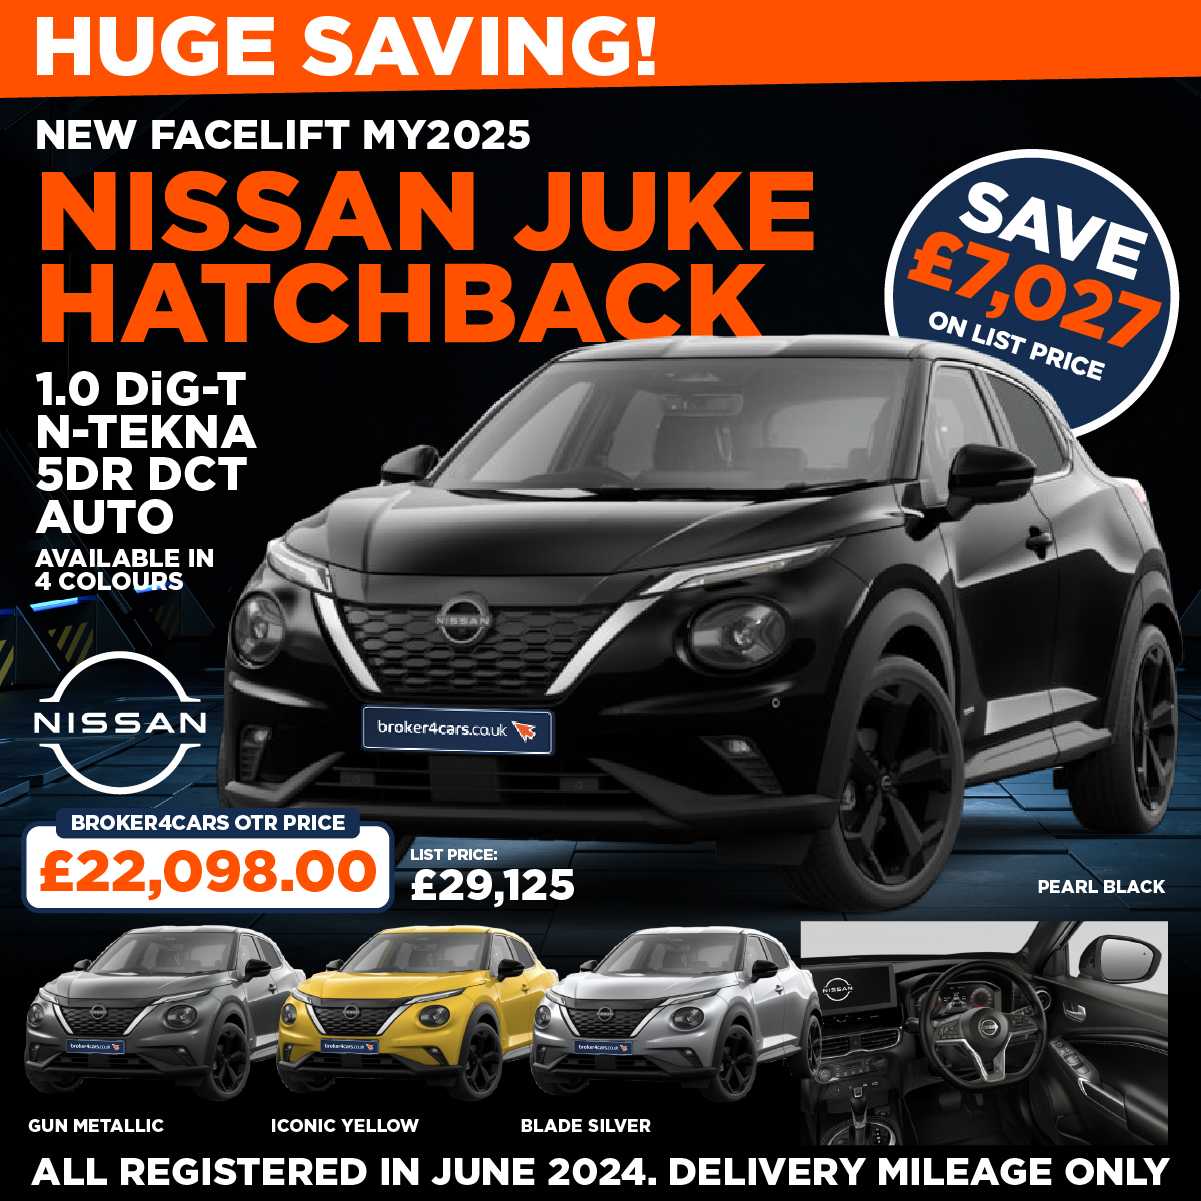 NEW FACELIFT MY2025 NISSAN JUKE HATCHBACK 1.0 DiG-T N-Connecta 5dr Manual. Available in either Black, Gun Metallic, Magnetic Blue or Ceramic Grey. All registered in June 2024. Delivery mileage only. List Price: £26,125. Save £6,646. Broker4Cars Price £19,479 OTR